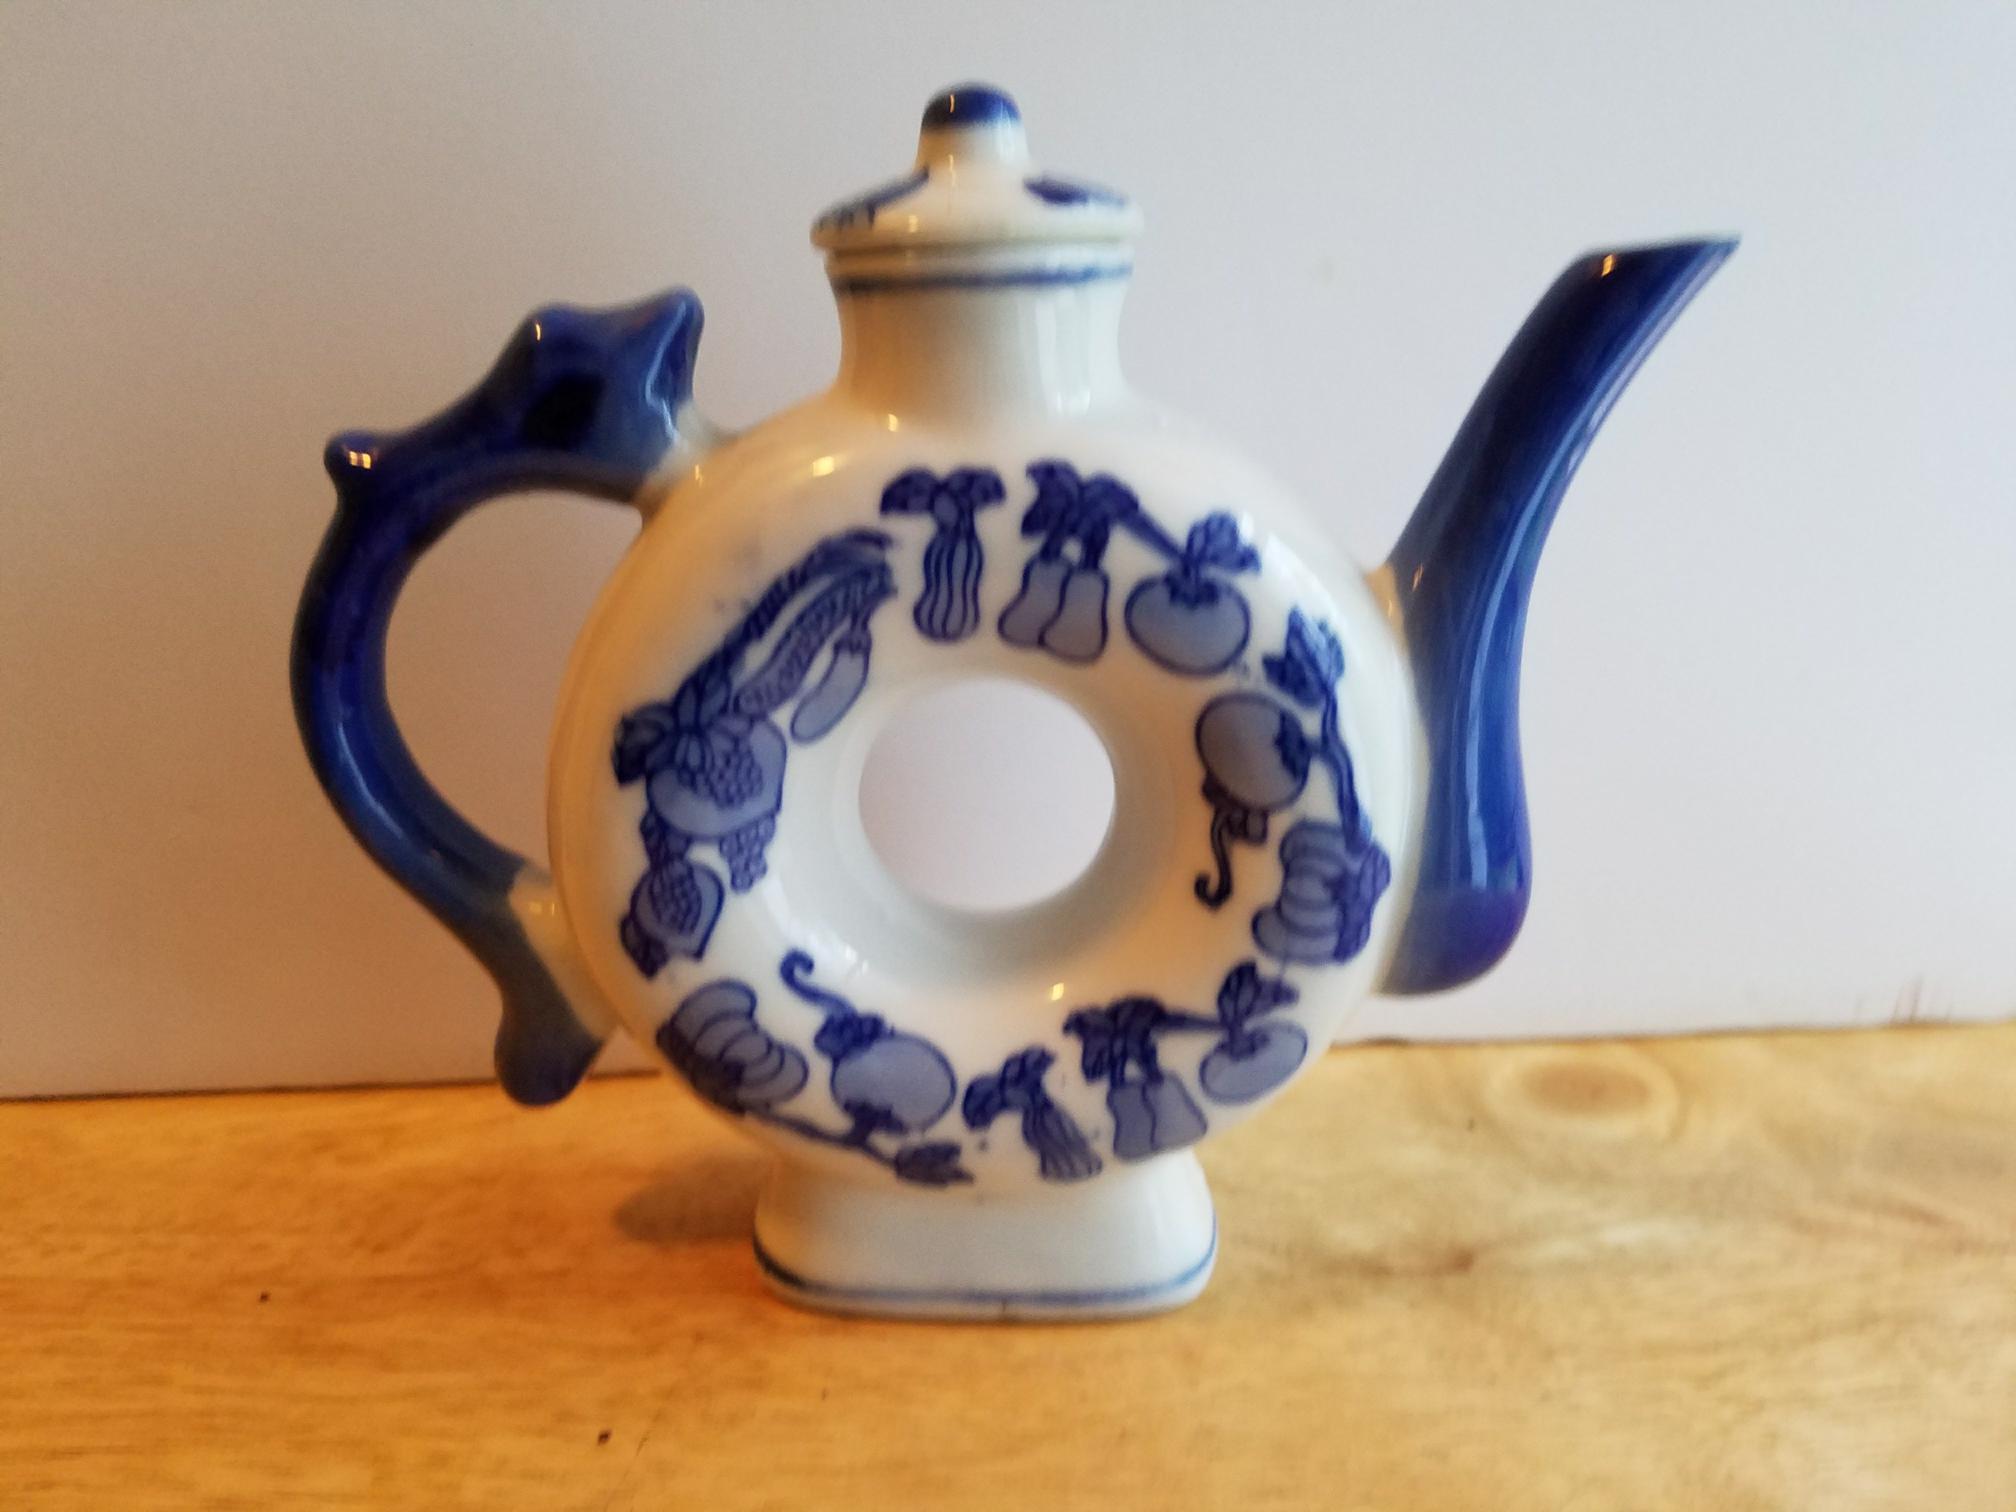 Blue and White Tea Pot Set Donut Porcelain Tea Pots With Lids, Blue and  White Chinoiserie Chinese Geometric and Floral Patterns 